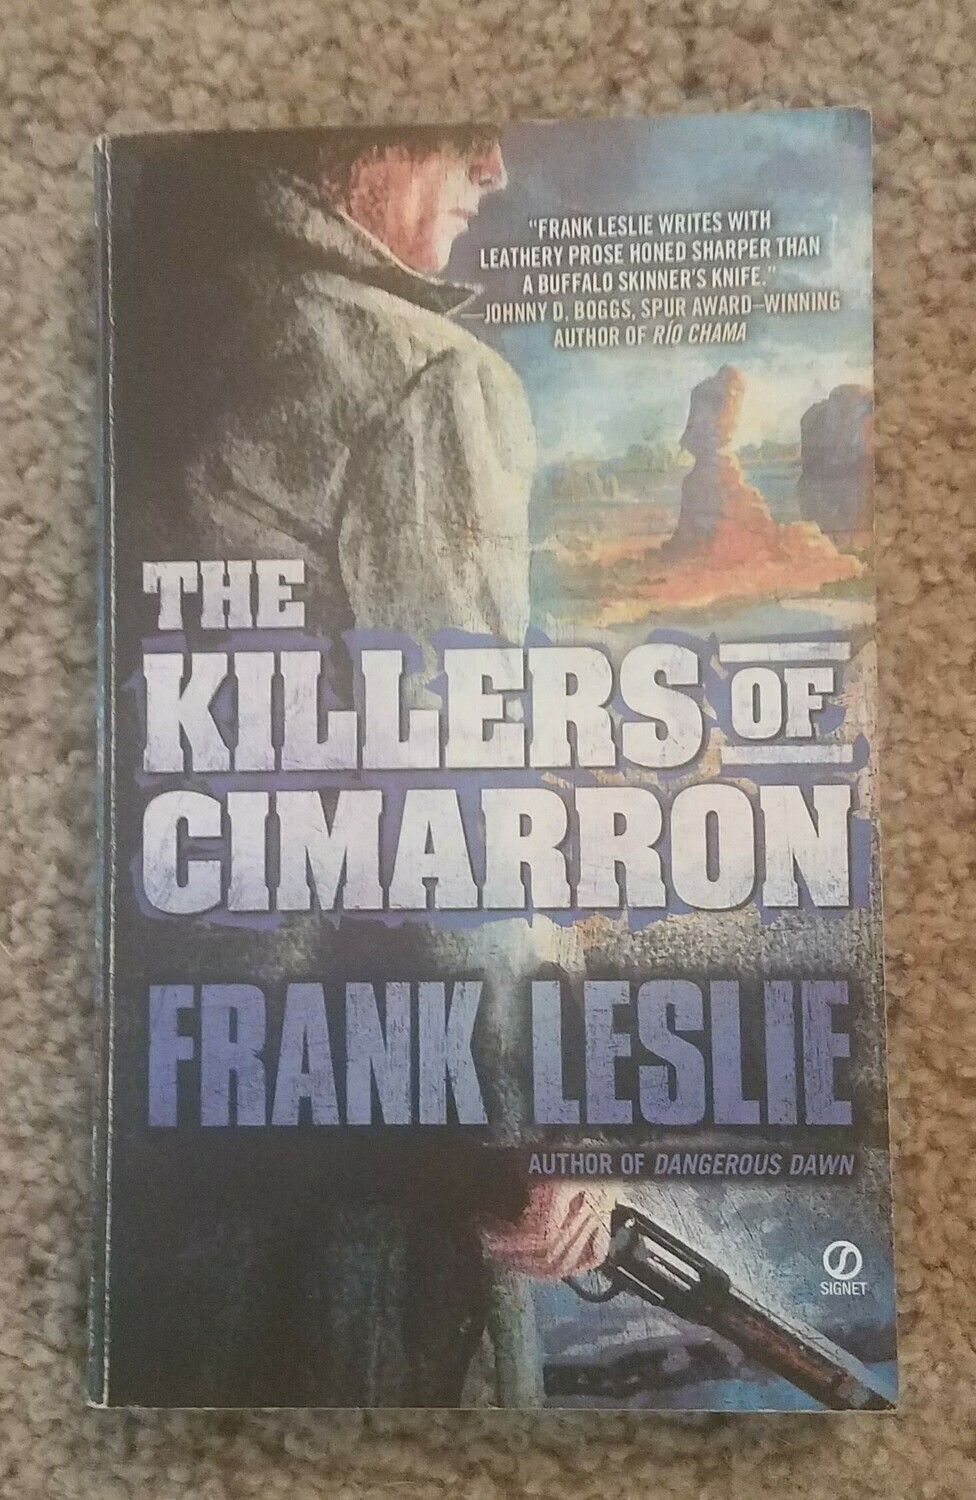 The Killers of Cimarron by Frank Leslie